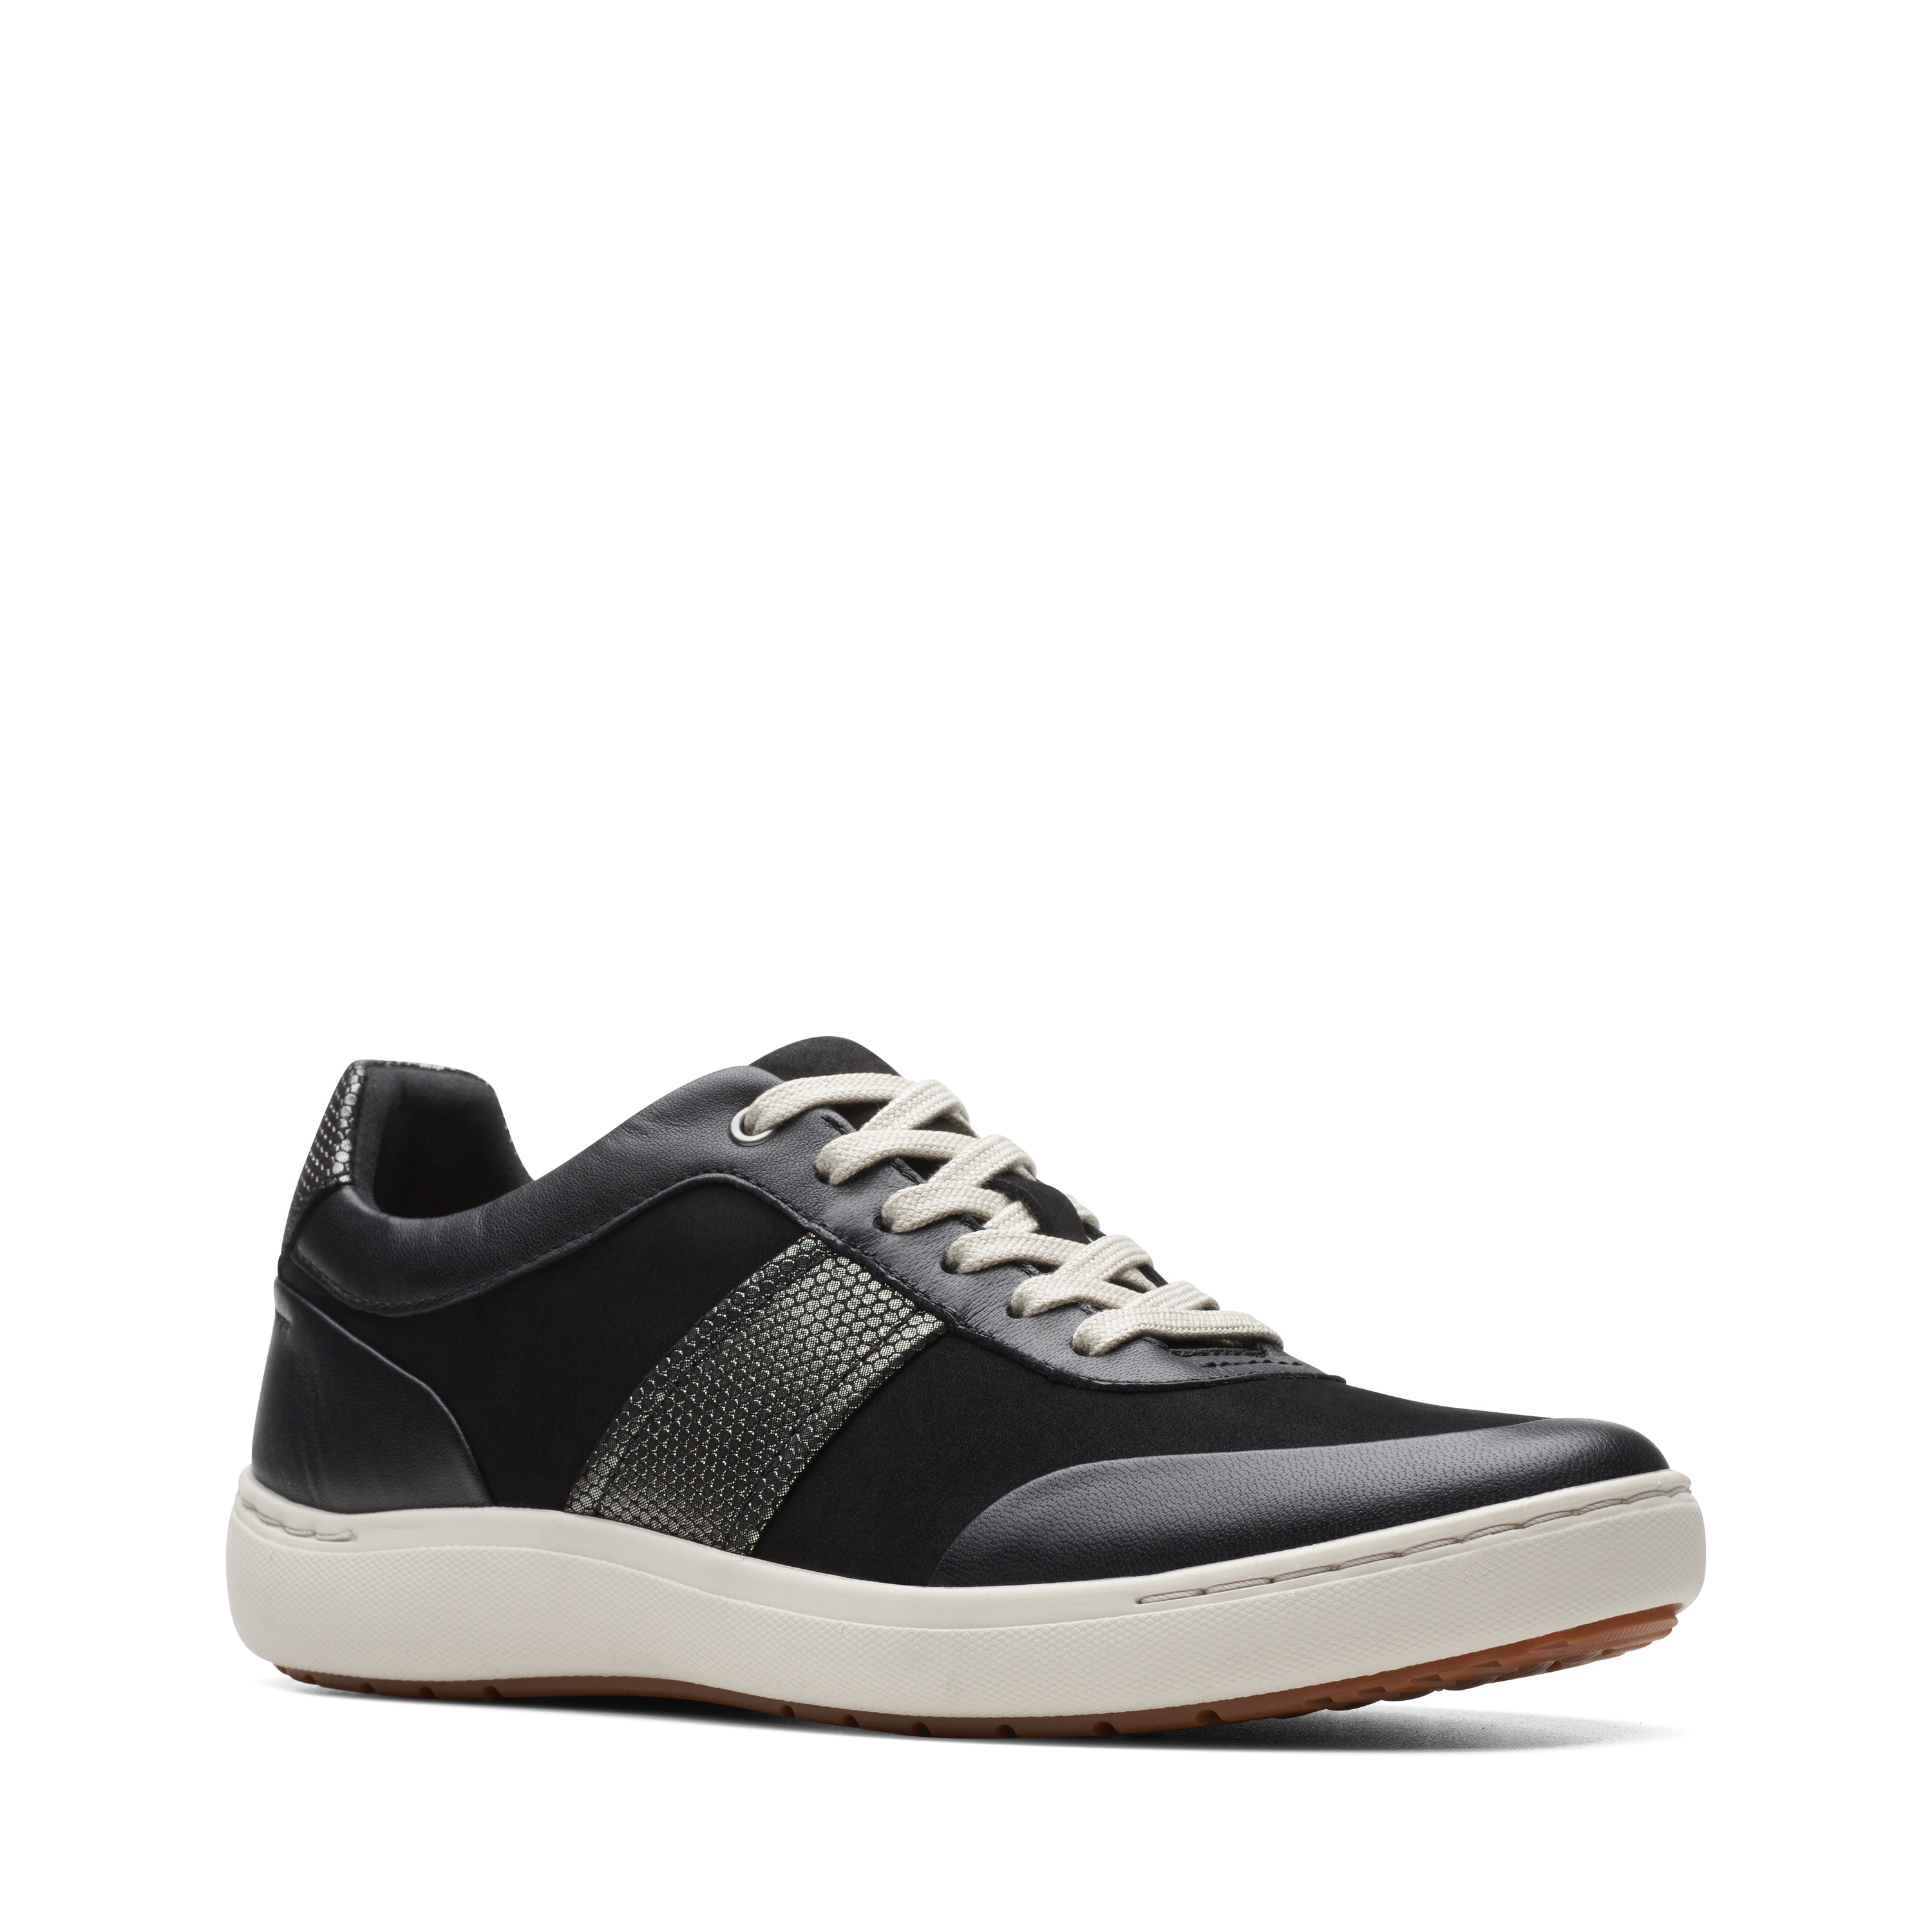 Clothing & Shoes - Shoes - Sneakers - Clarks Nalle Fern Sneaker